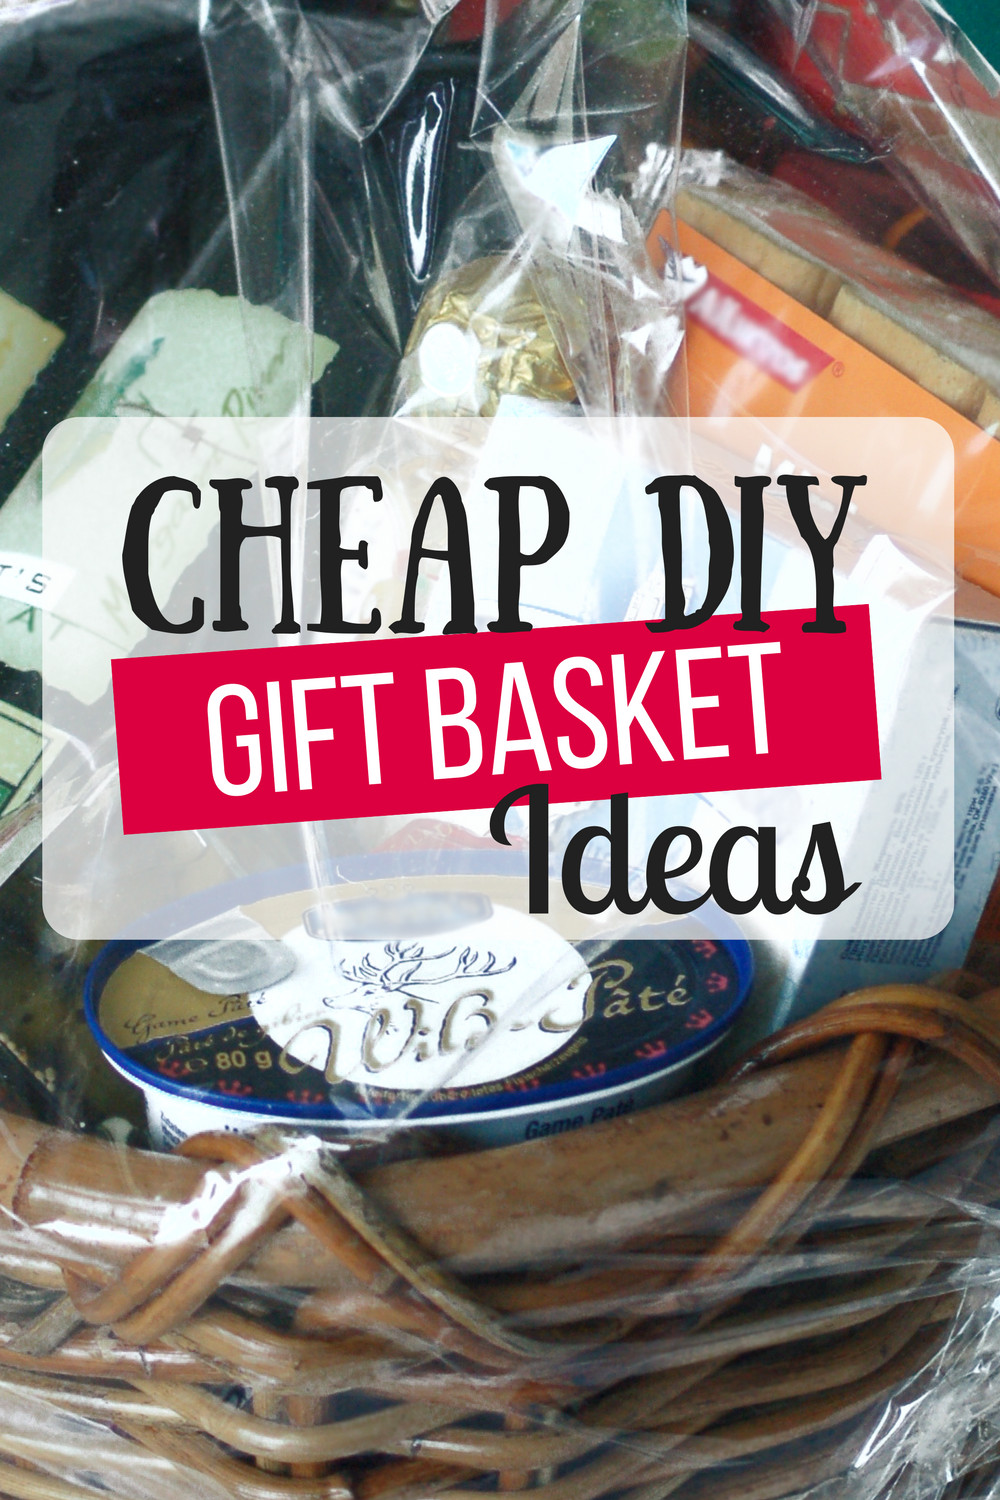 Making Gift Basket Ideas
 Cheap DIY Gift Baskets The Busy Bud er